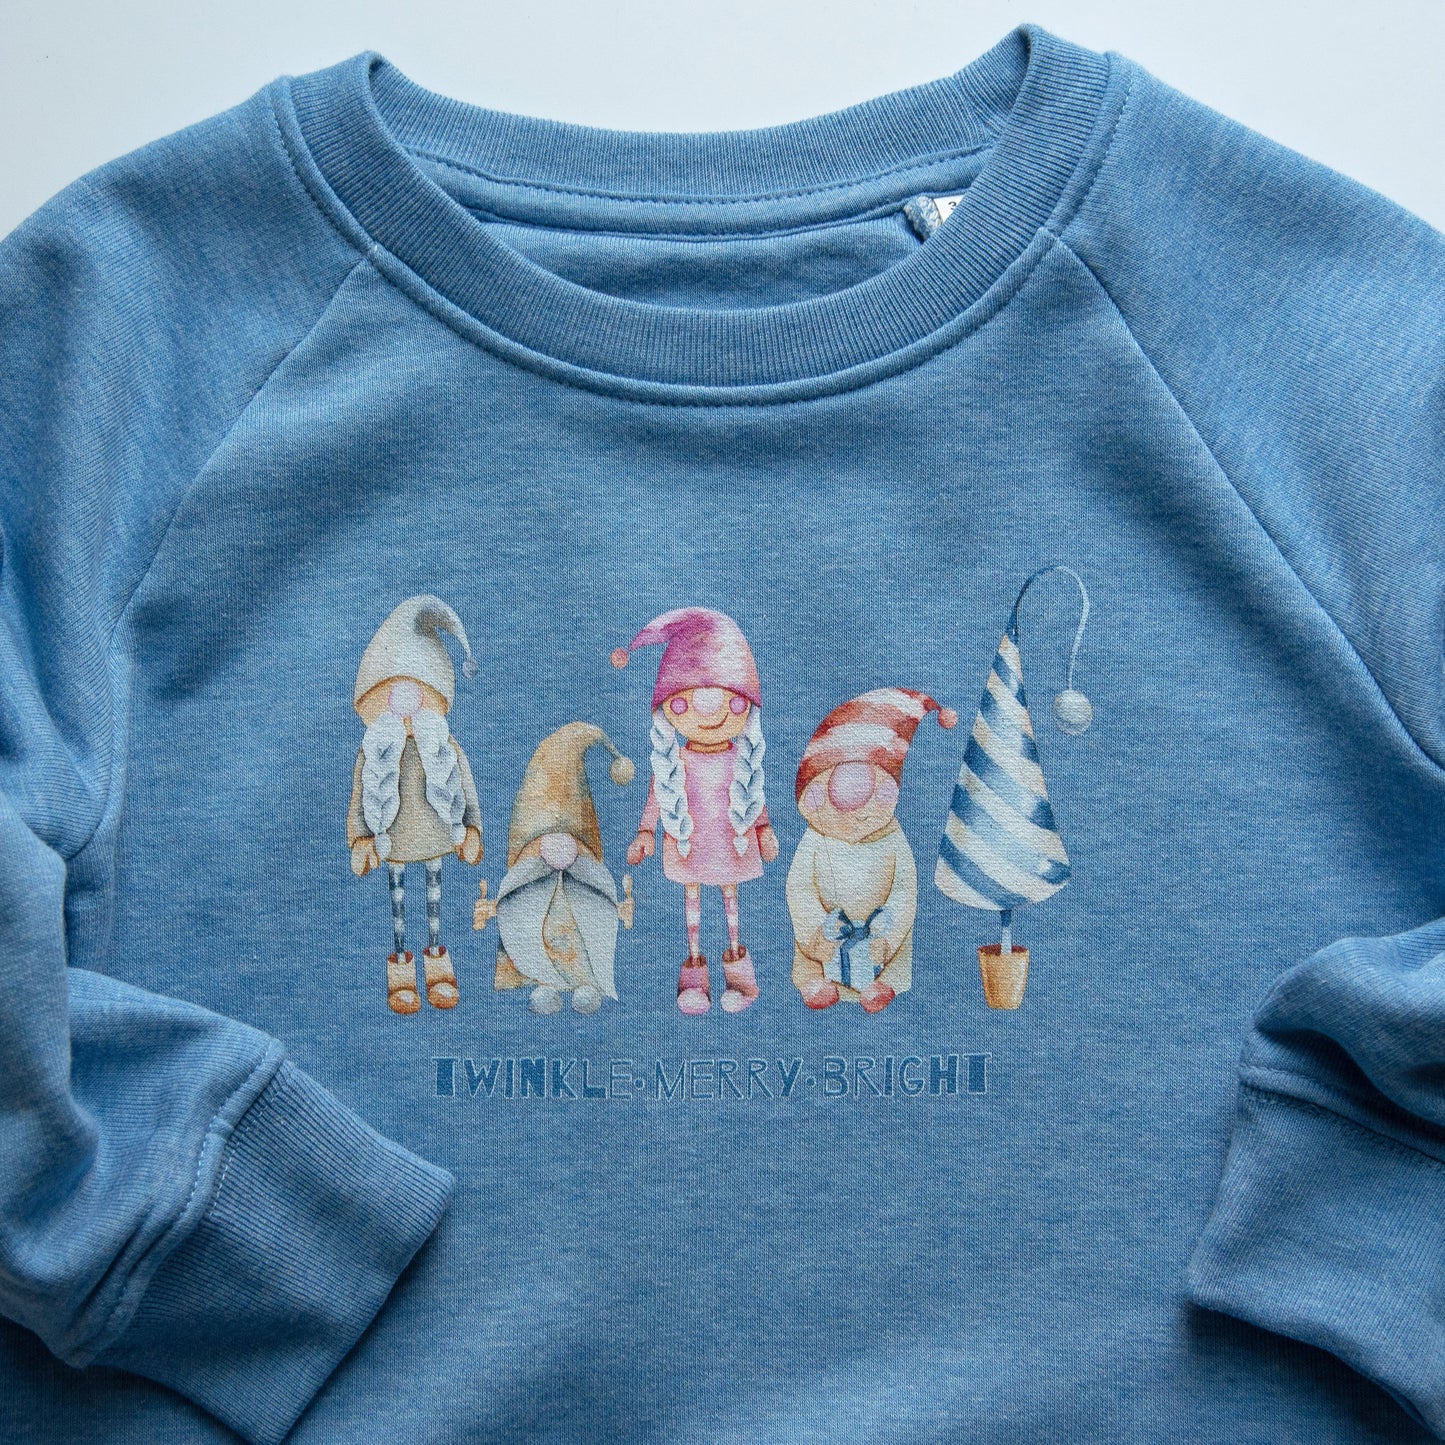 TWINKLE MERRY BRIGHT - toddler + youth sweatshirt - Little Mate Adventures